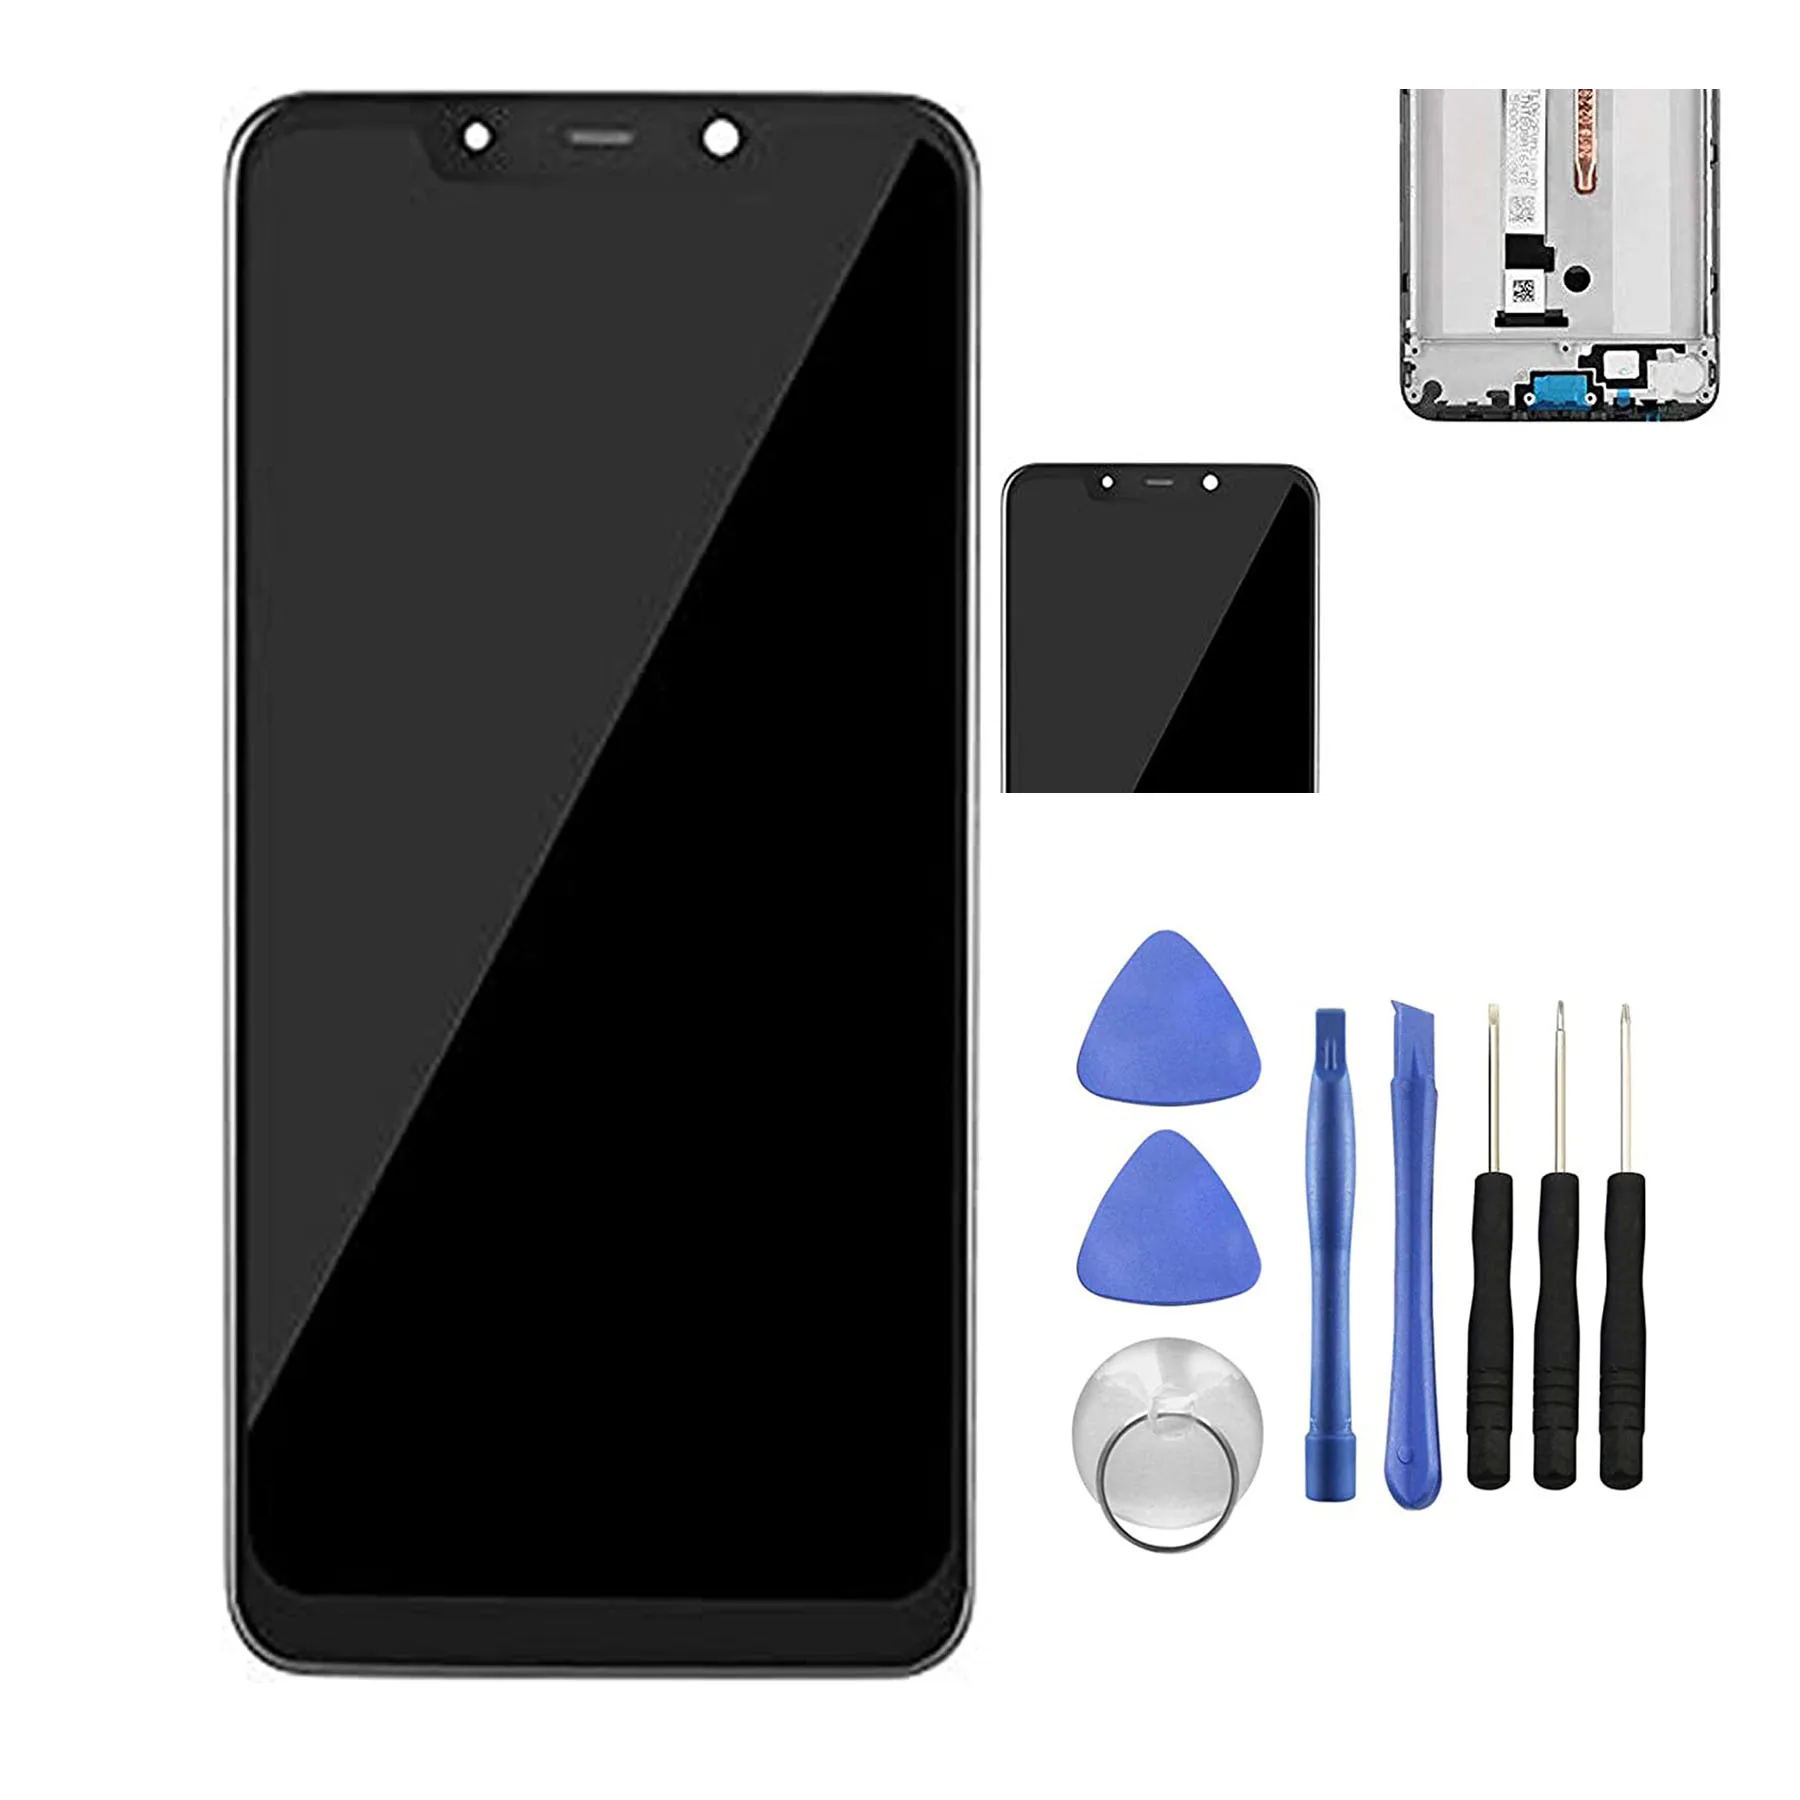 

Original Poco F1 Lcd Display For Xiaomi Pocophone F1 Lcd Display Touch Screen Digitizer Assembly For Xiaomi PocophoneF1 PocoF1